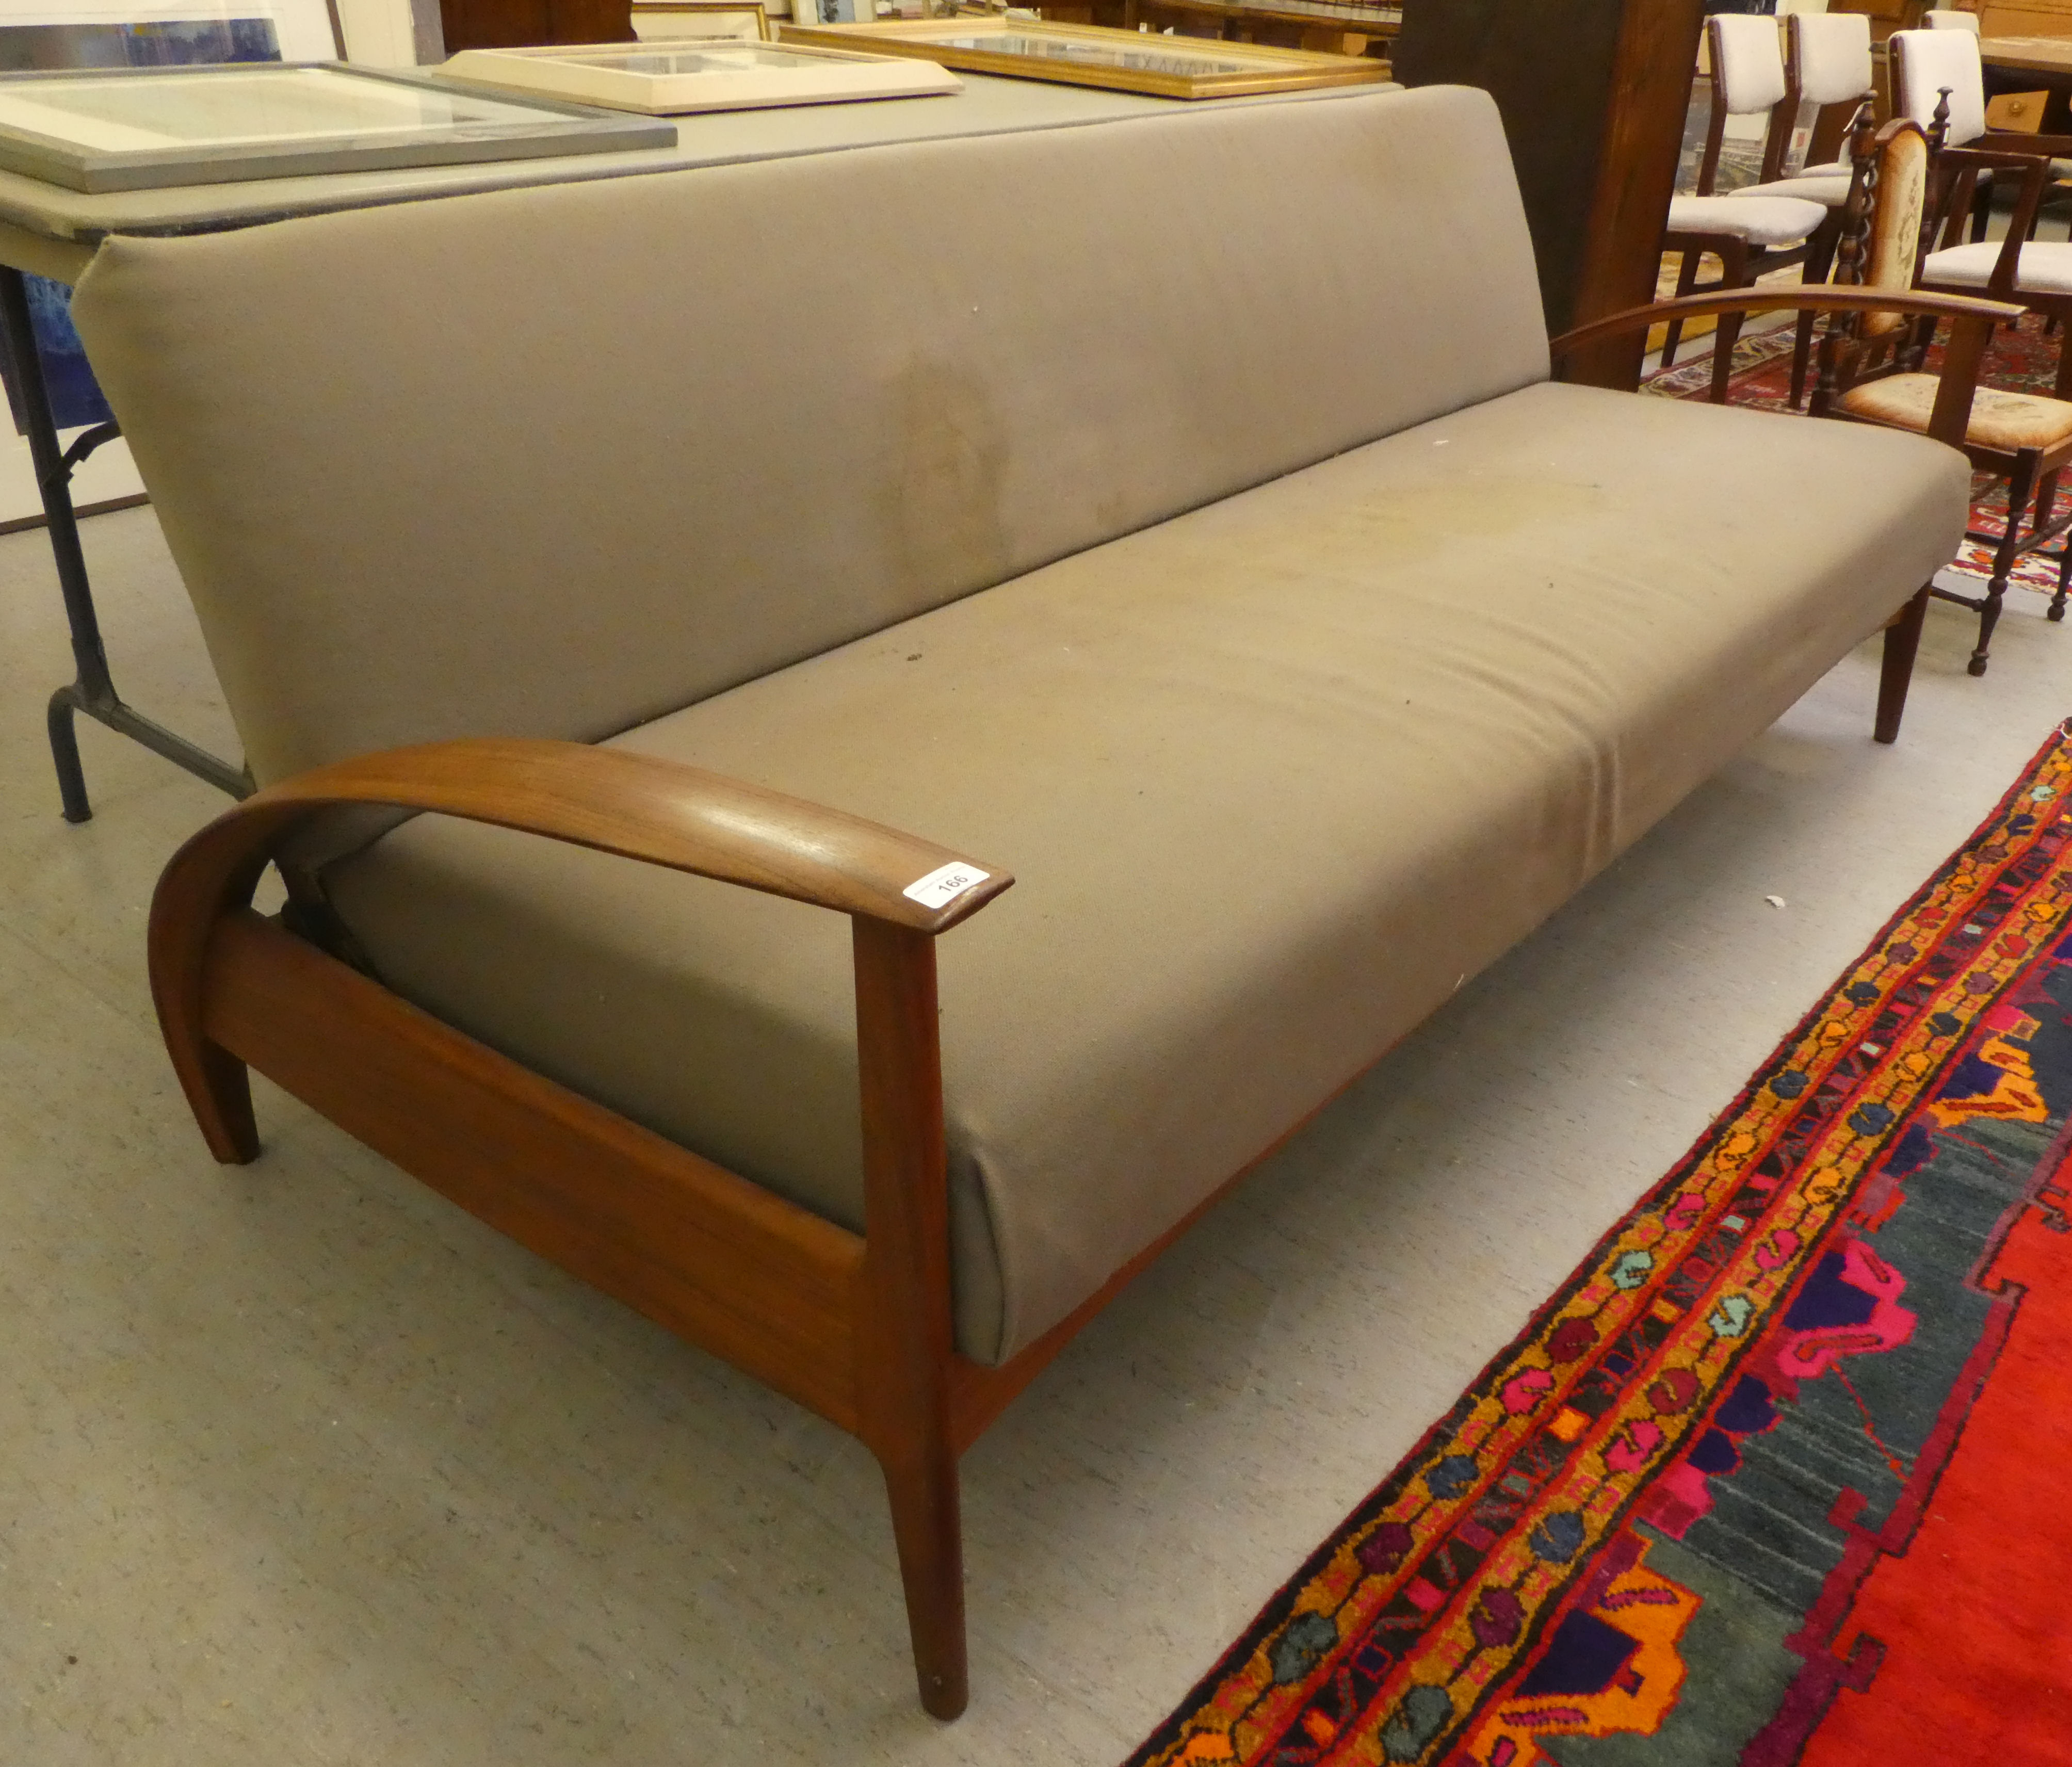 A 1970s teak framed bed settee, raised on a panelled underframe and turned legs   bears a